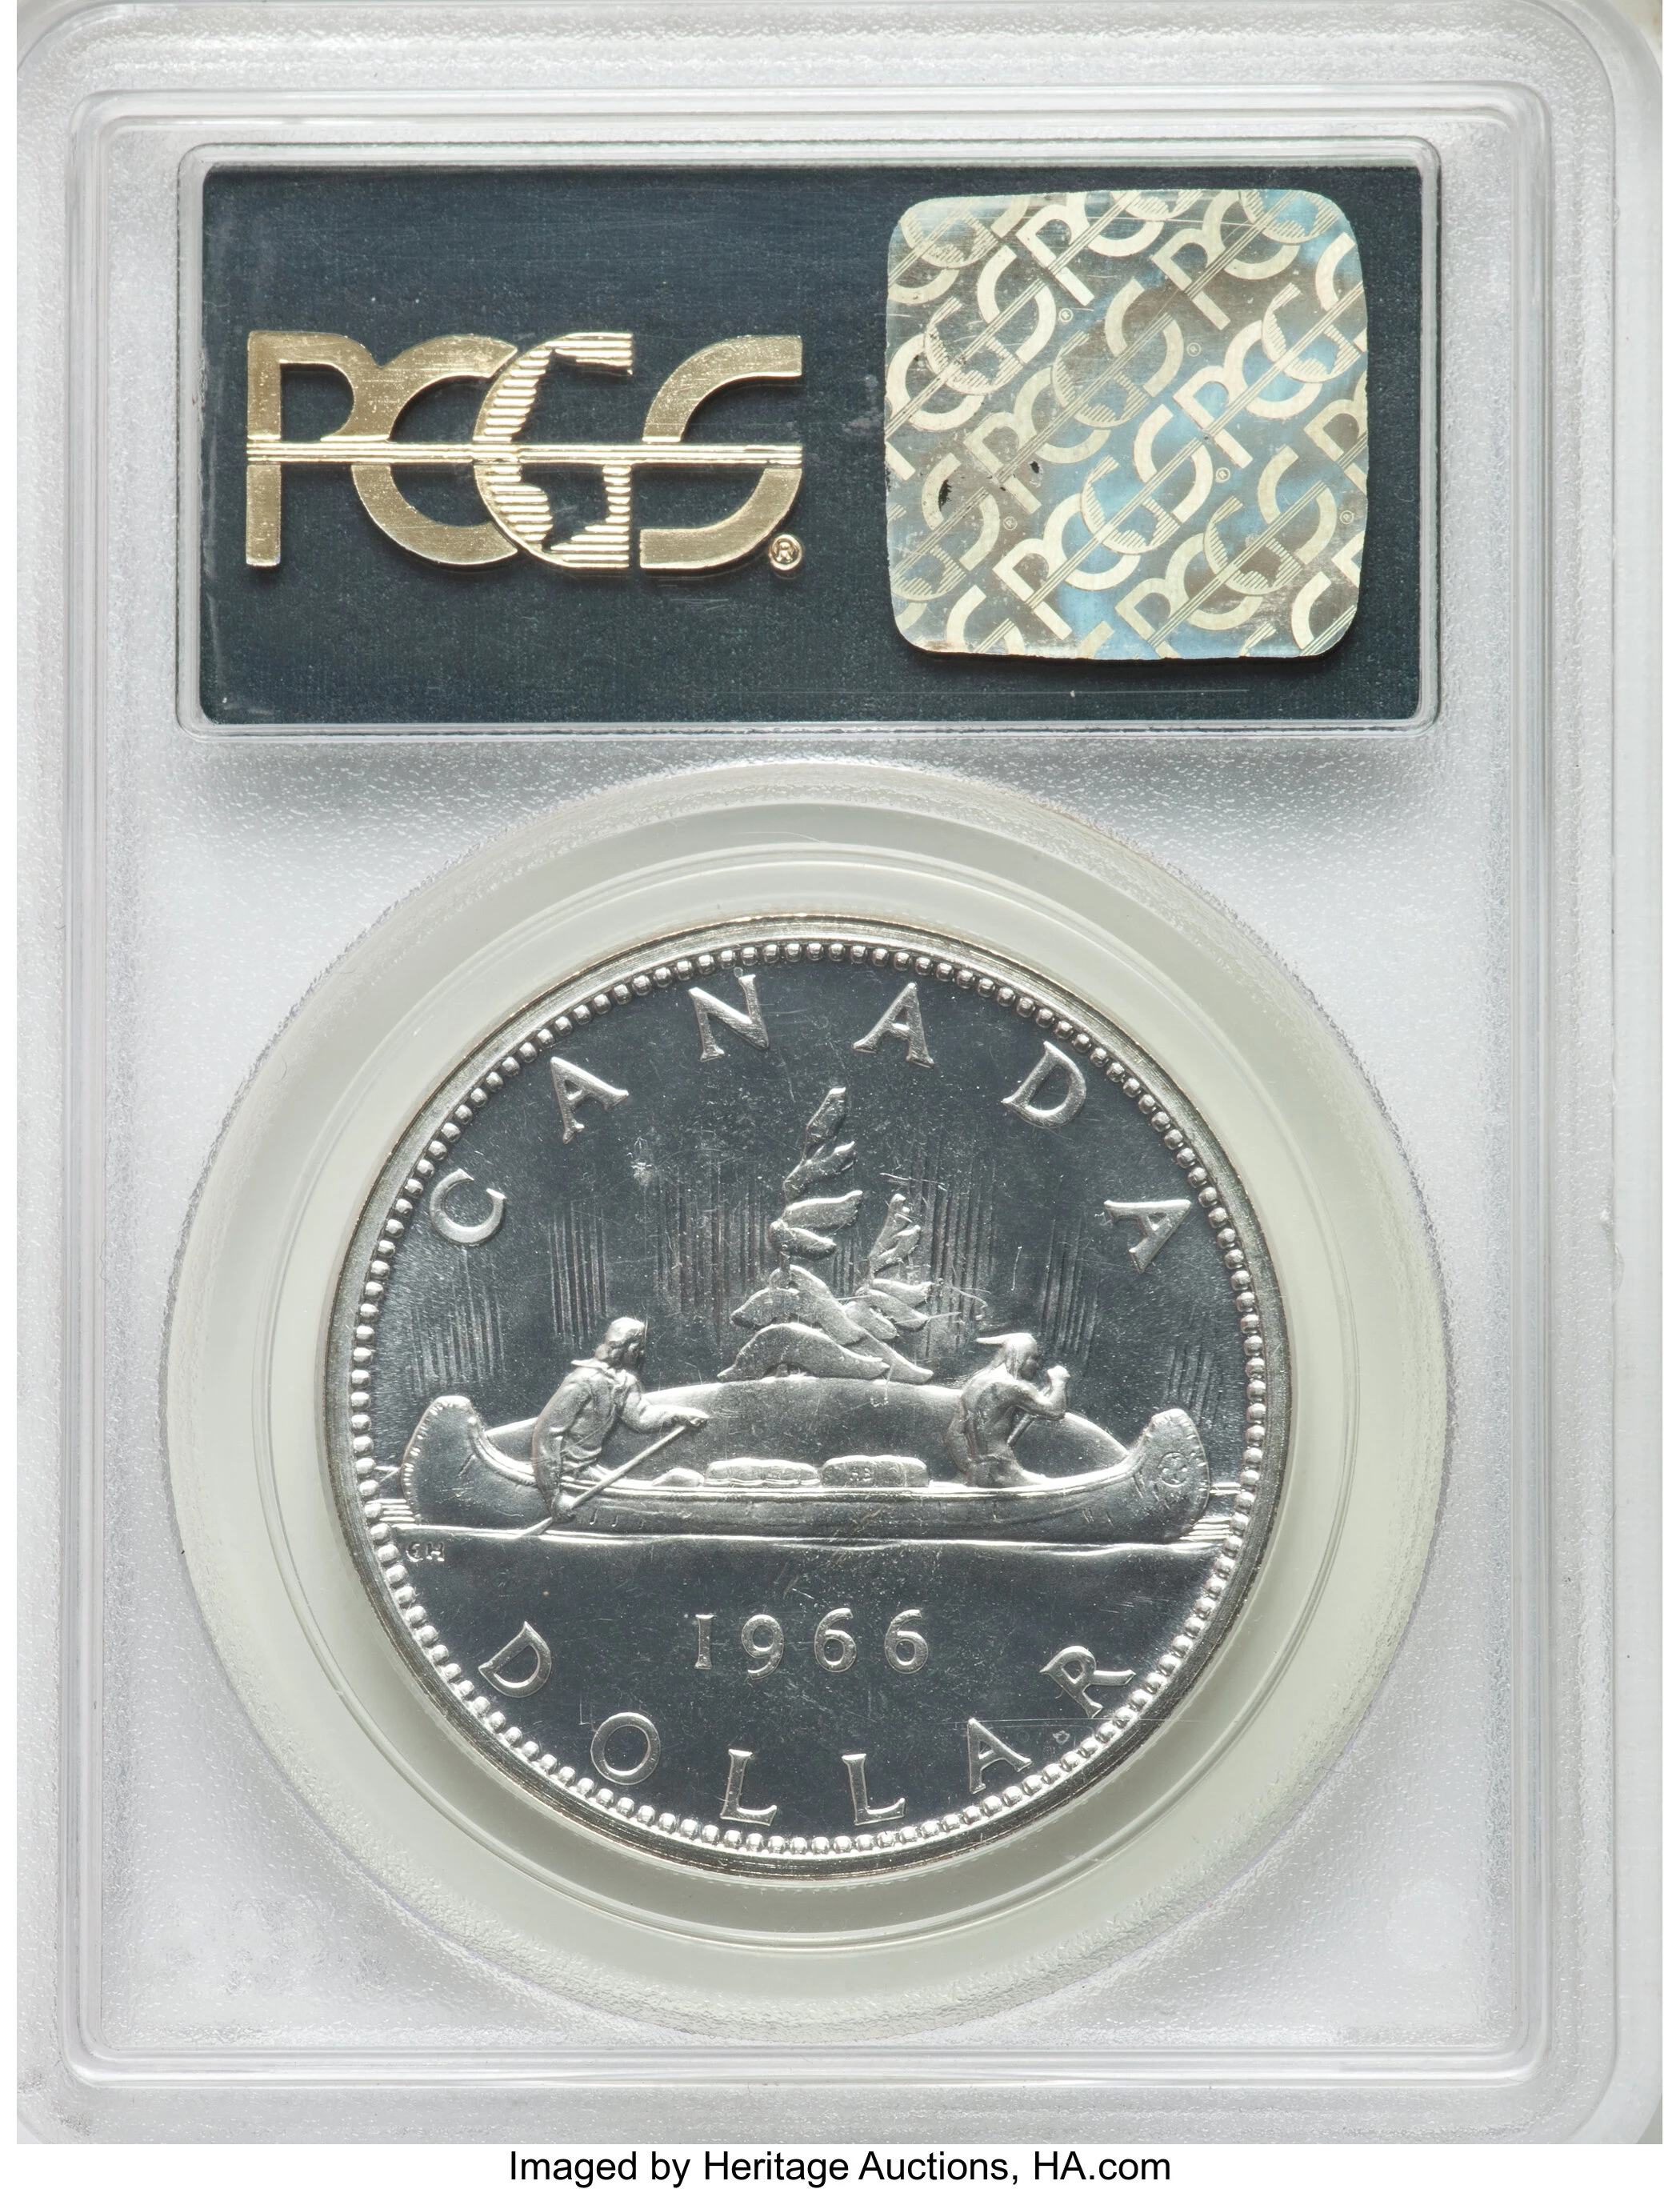 Coins and Canada - 1 dollar 1966 - Proof, Proof-like, Specimen